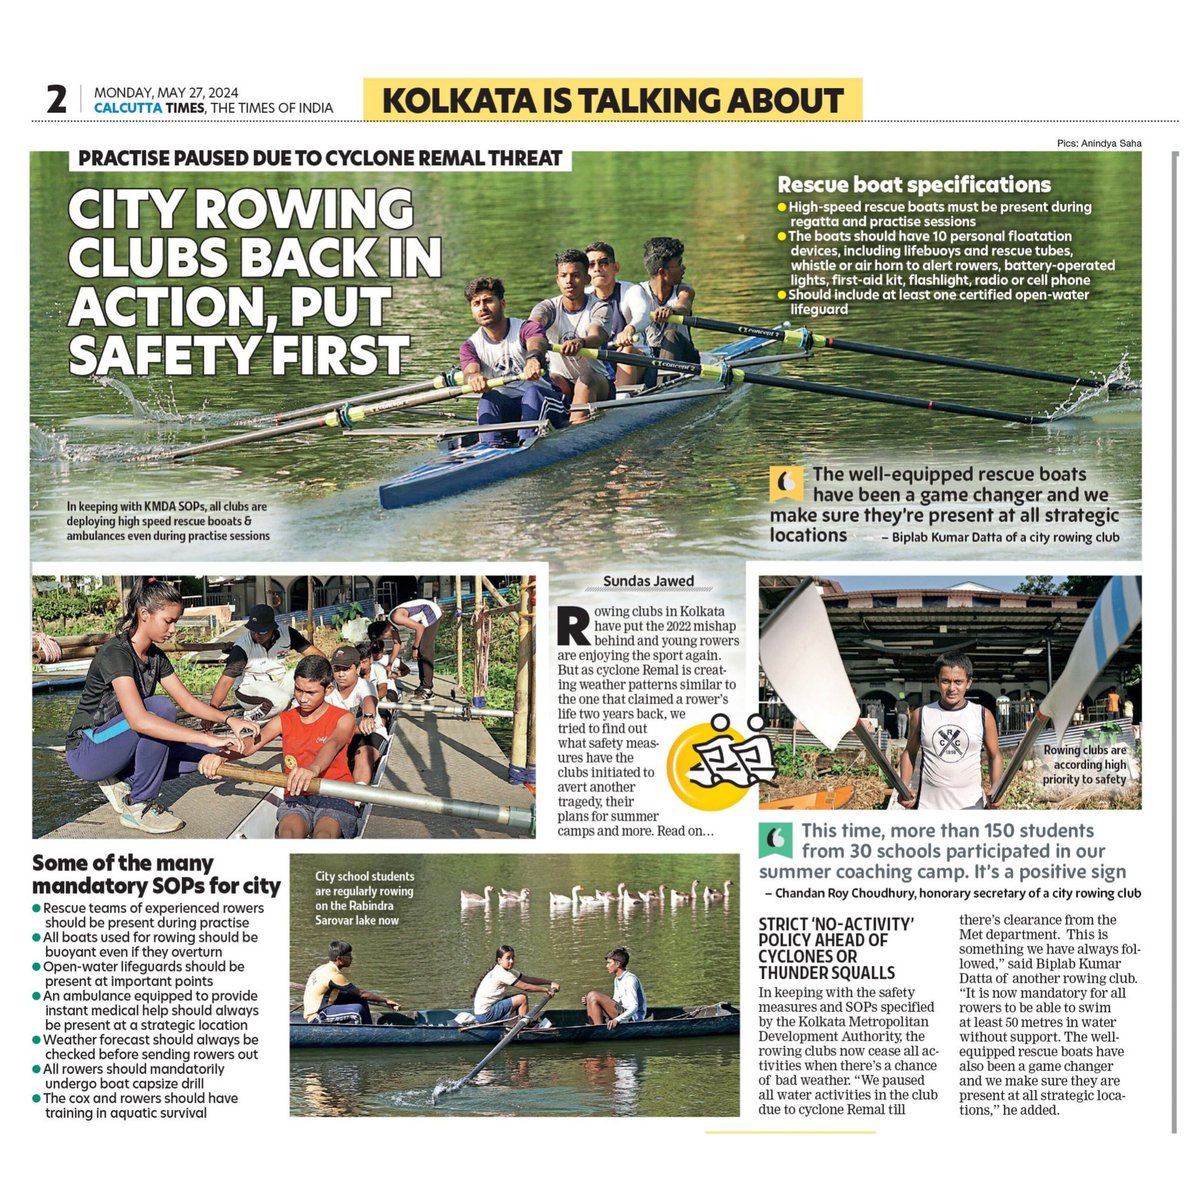 City rowing clubs are back in action, putting safety first. We tried to find out what safety measures the club initiated for Cyclone Remal. Read on.. #cycloneremal #rowing #safetyprecautions #calcuttatimes